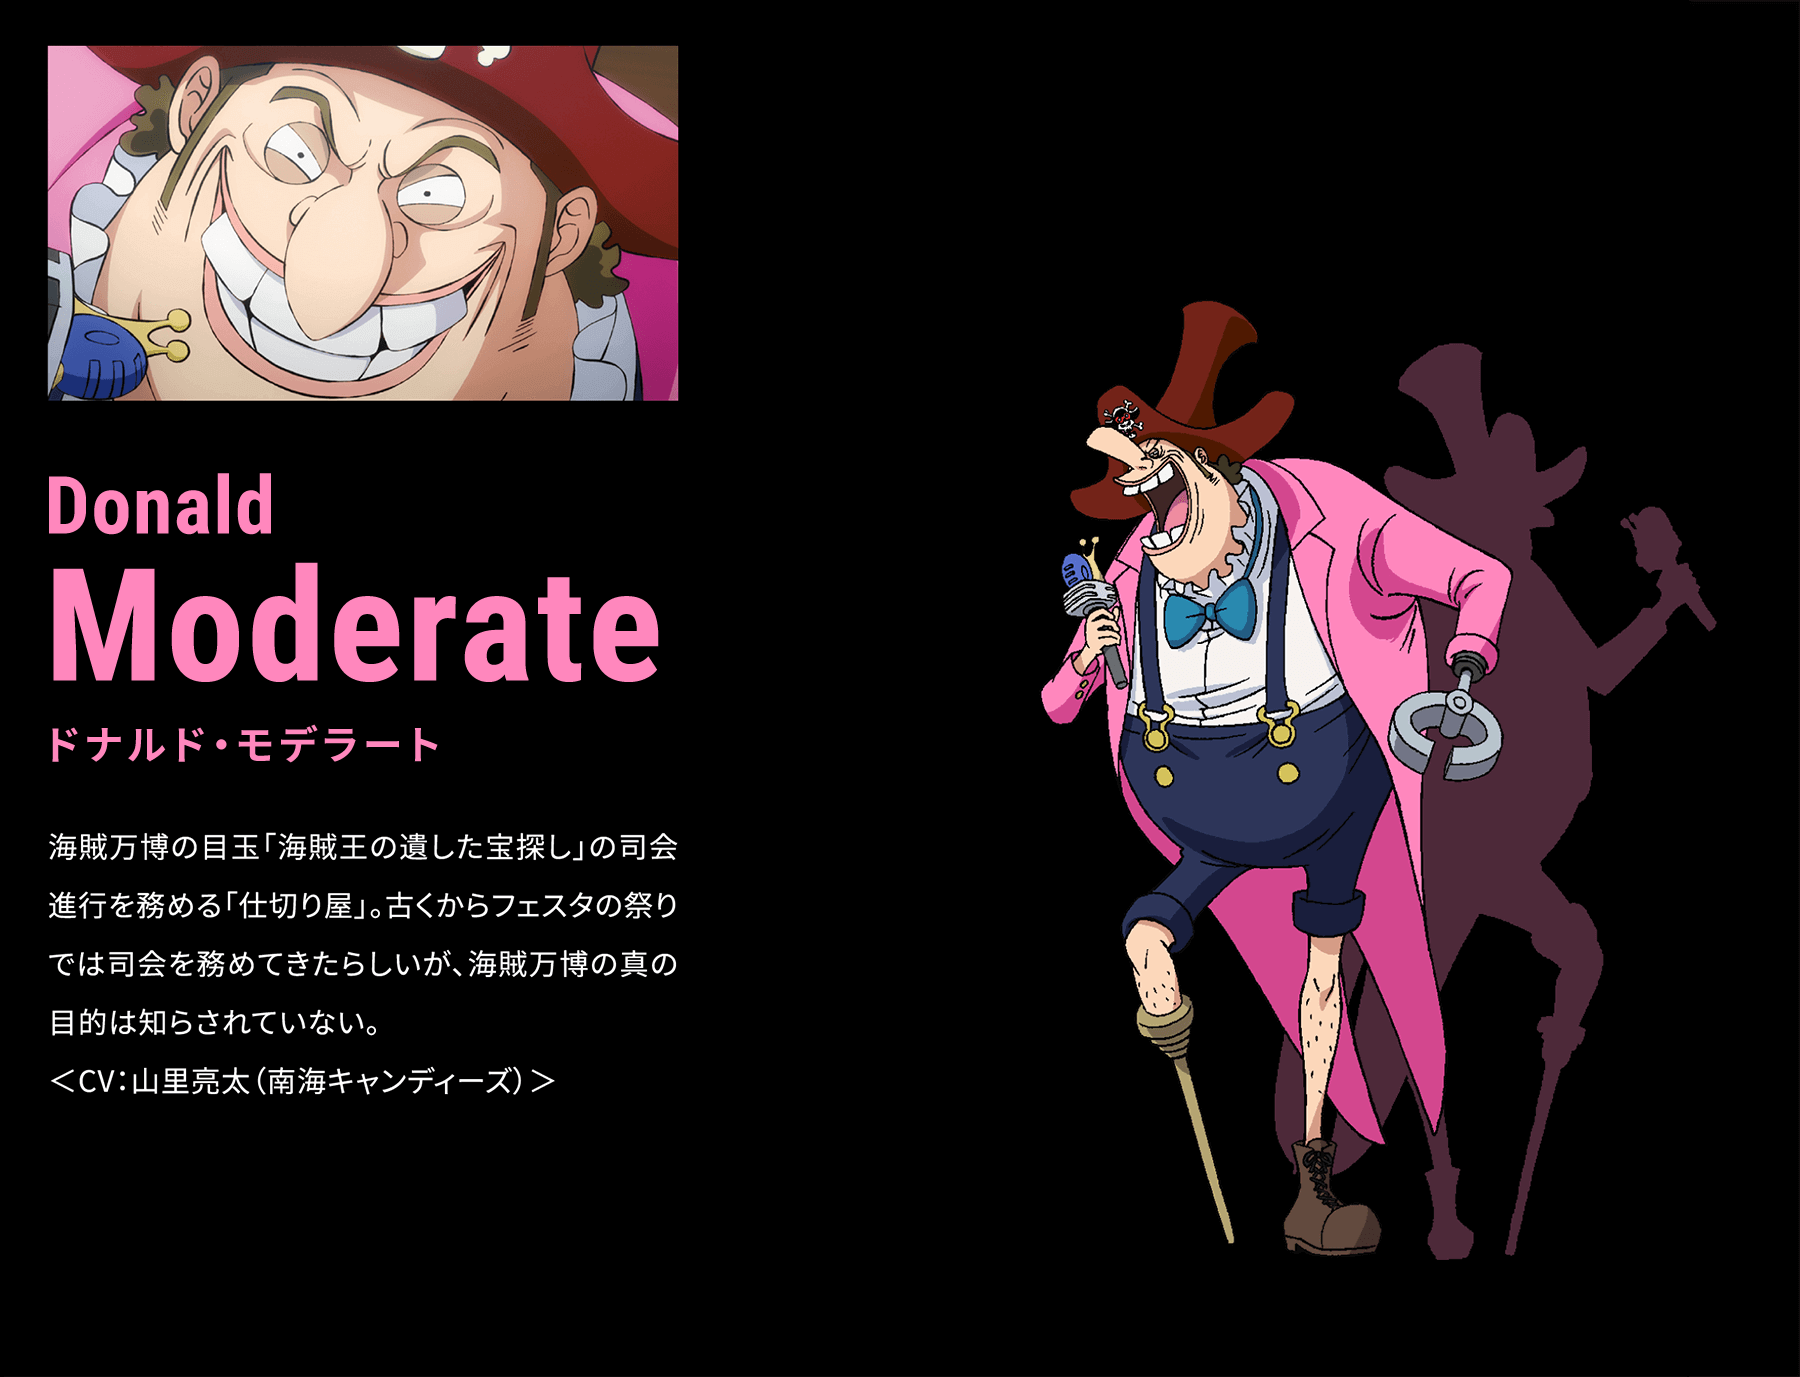 Character キャラクター 劇場版 One Piece Stampede 公式サイト